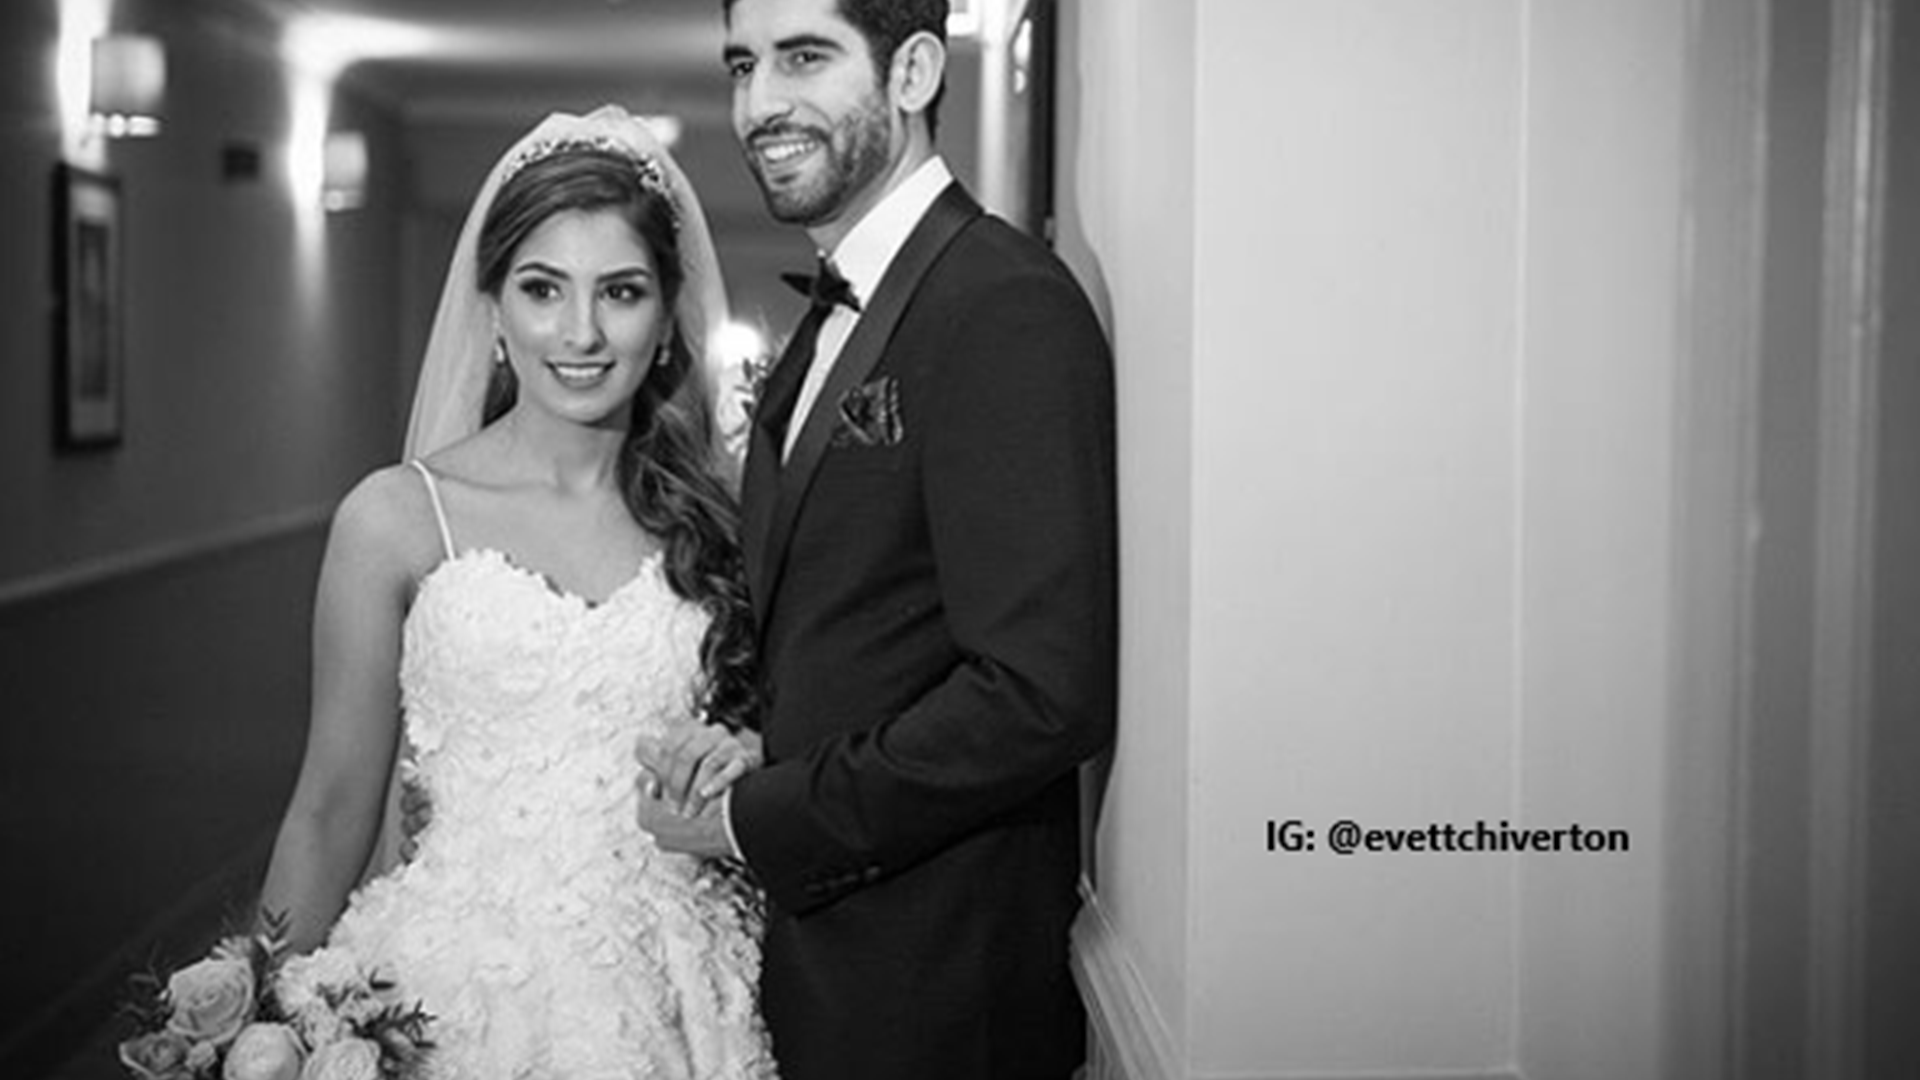 Bide and groom pose for photo in hallway after wedding